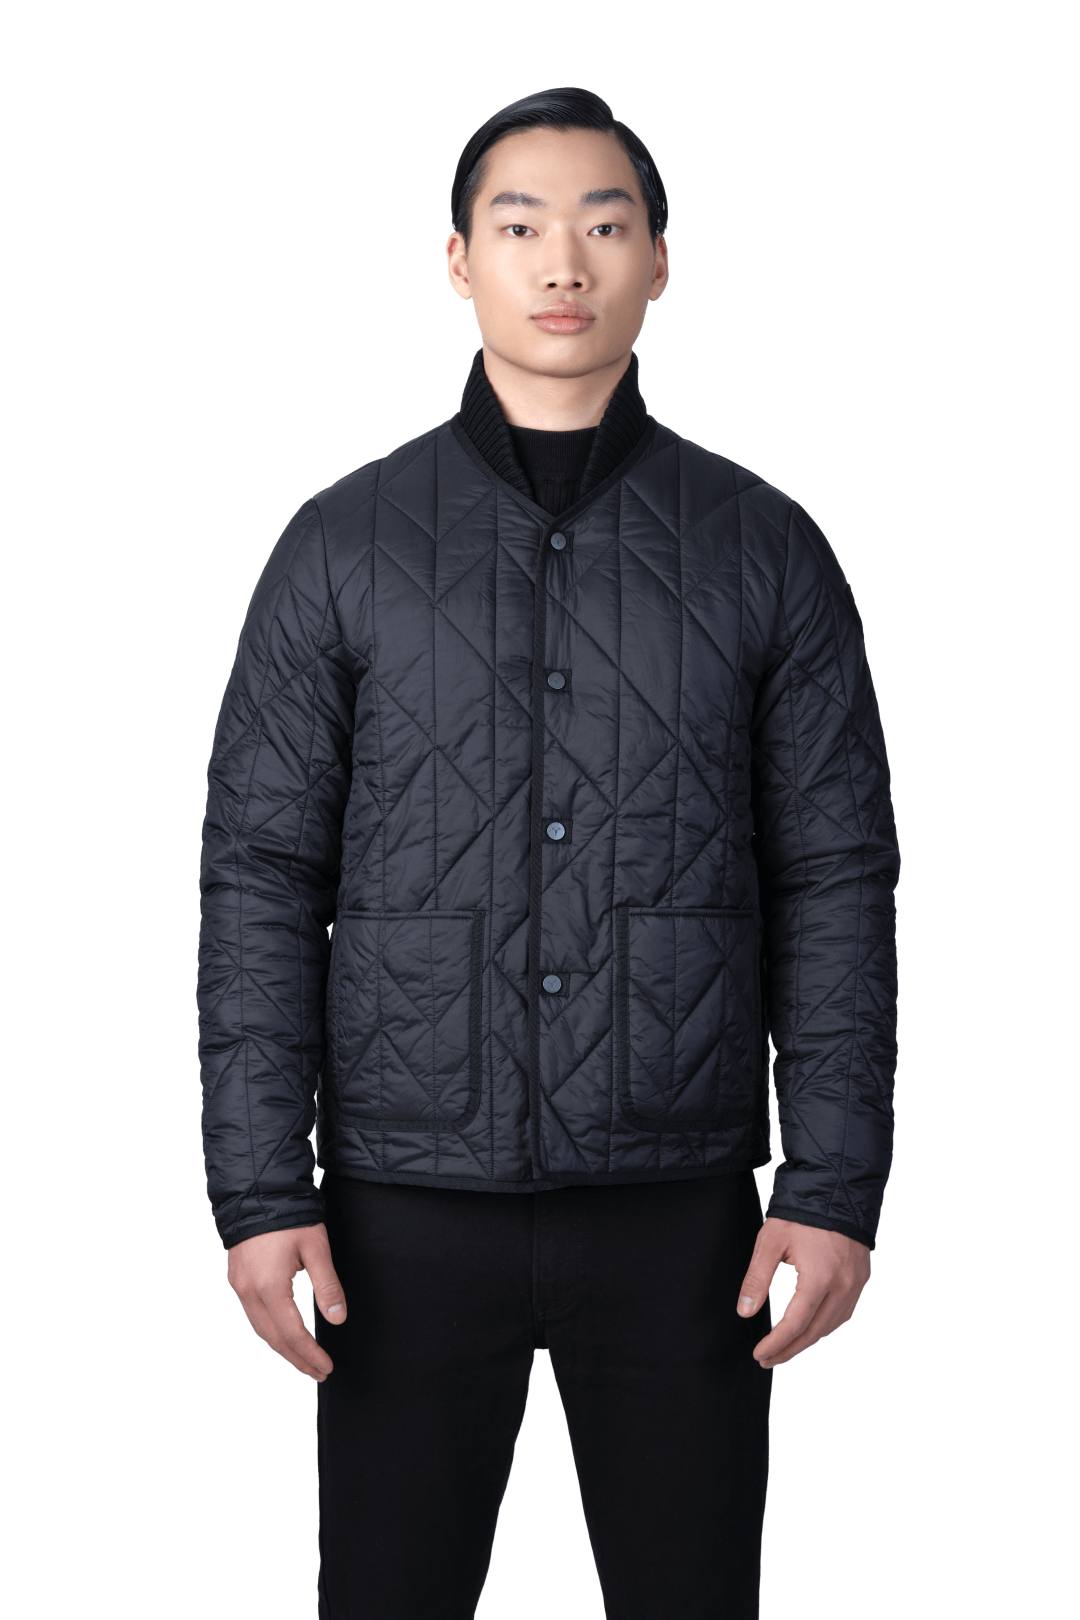 Lunar New Year Men's Quilted Short Jacket in hip length, sustainable and environmentally friendly Primaloft Gold Insulation Active+, with branded snap button front, two waist patch pockets, and chevron quilted body, in Black